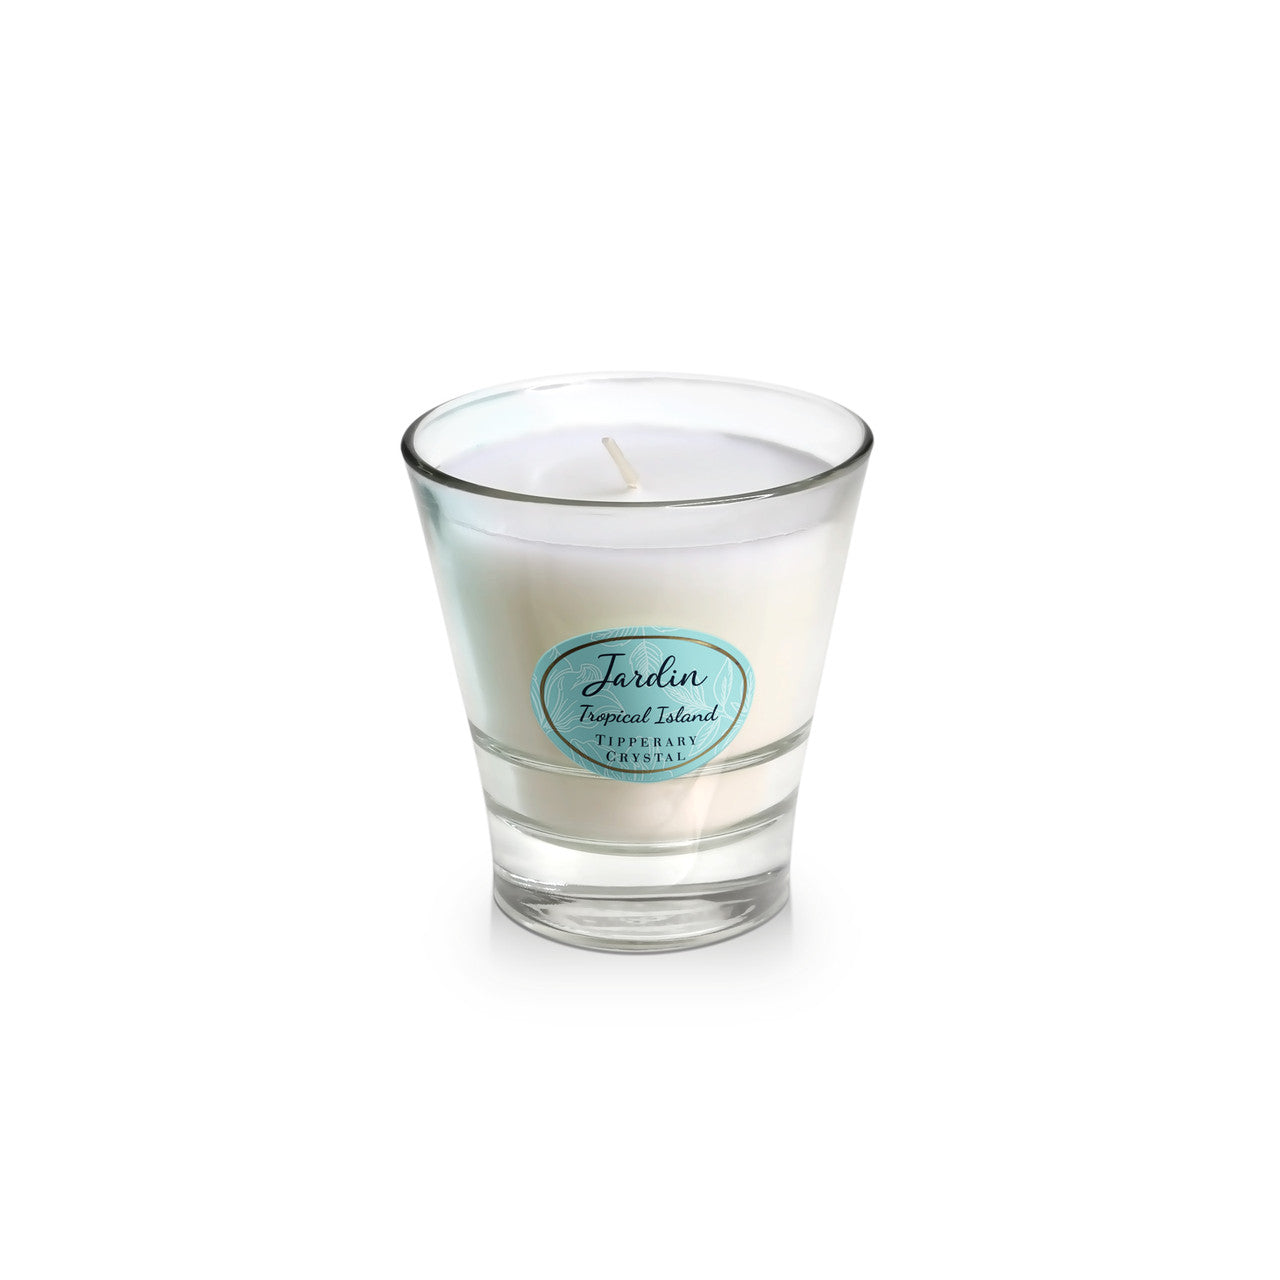 Tipperary Crystal Jardin Collection Candle - Tropical Island  NEW 2022  Our luxurious range of fragranced candles are hand poured and hand finished using a natural blend of wax and a lead-free cotton braided wick to ensure a clean, toxin-free burn in your home. Each fragrance is made using the essence of essential oils and has a maximum of 40-45 hours burn time.